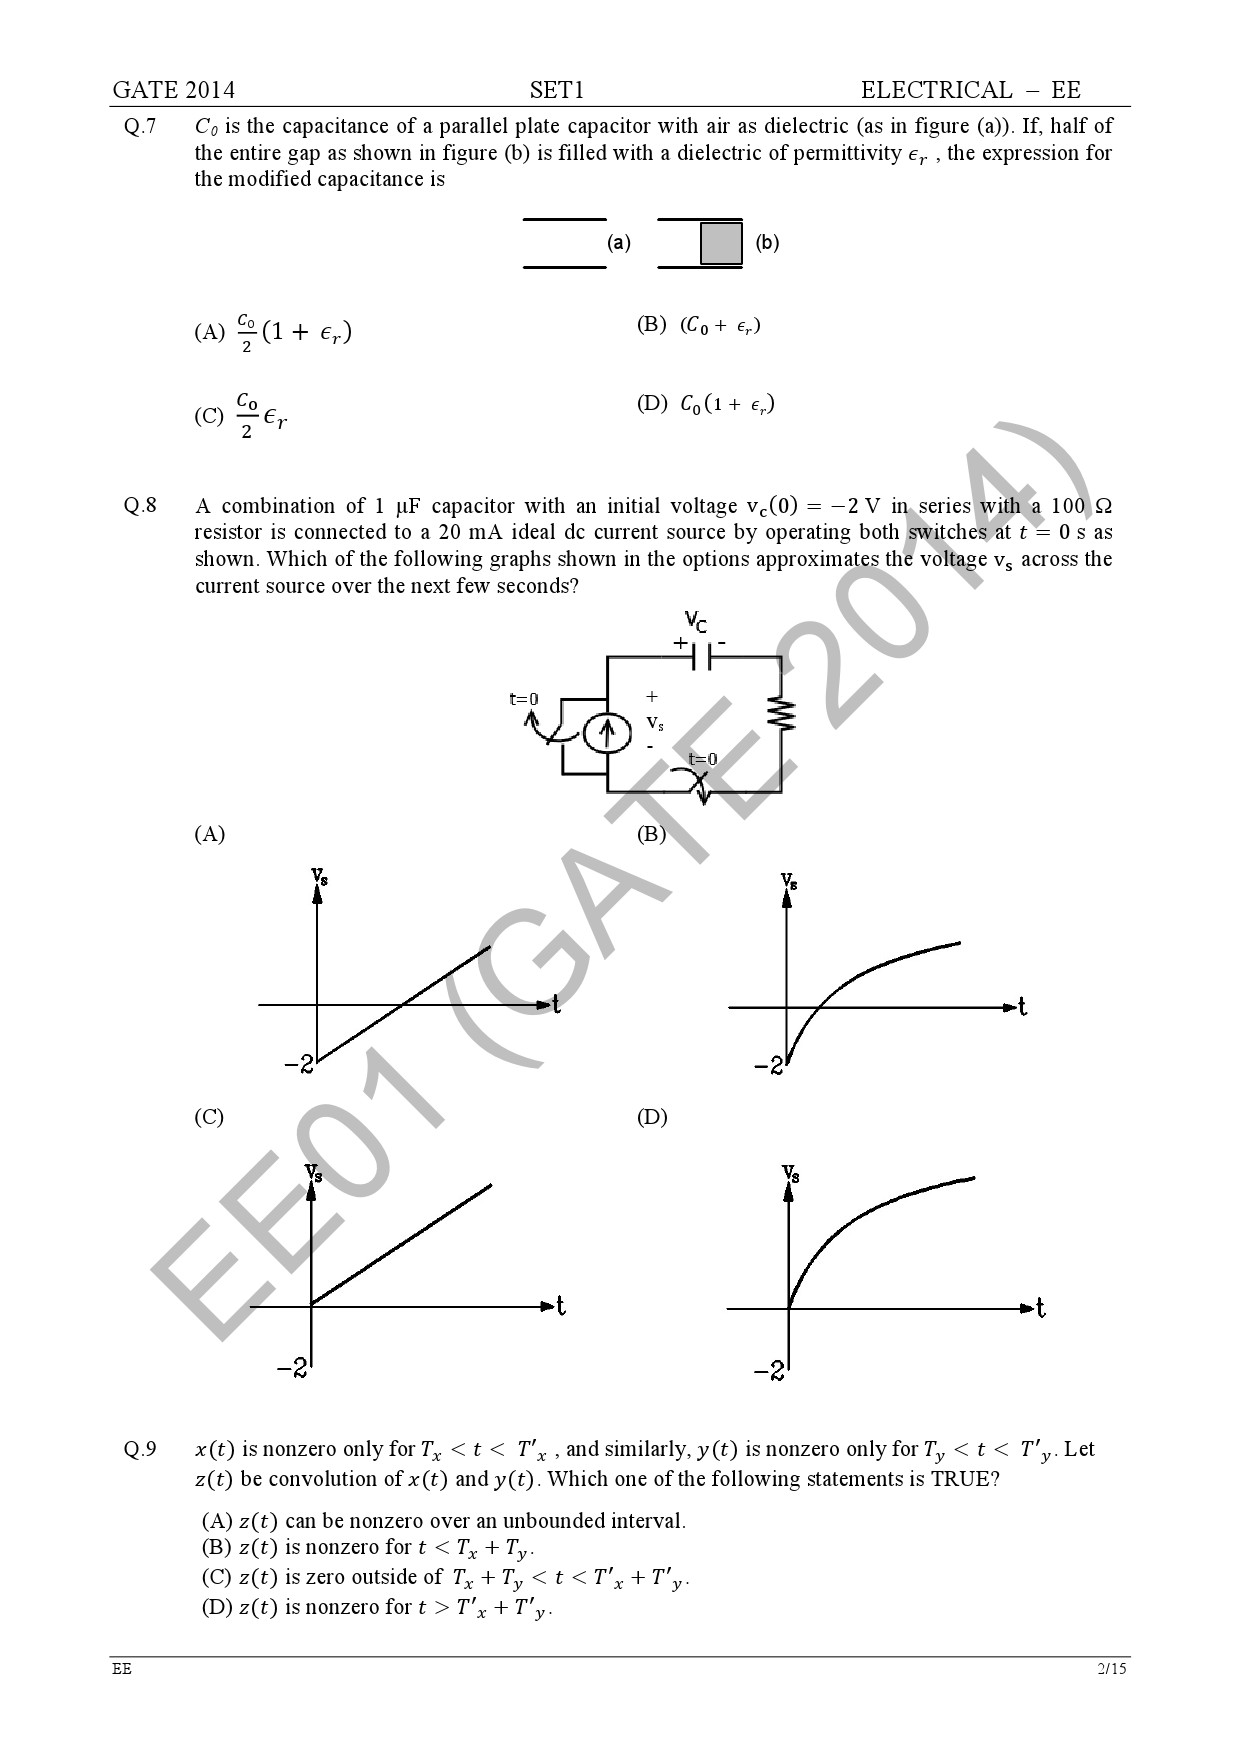 GATE Exam Question Paper 2014 Electrical Engineering Set 1 8